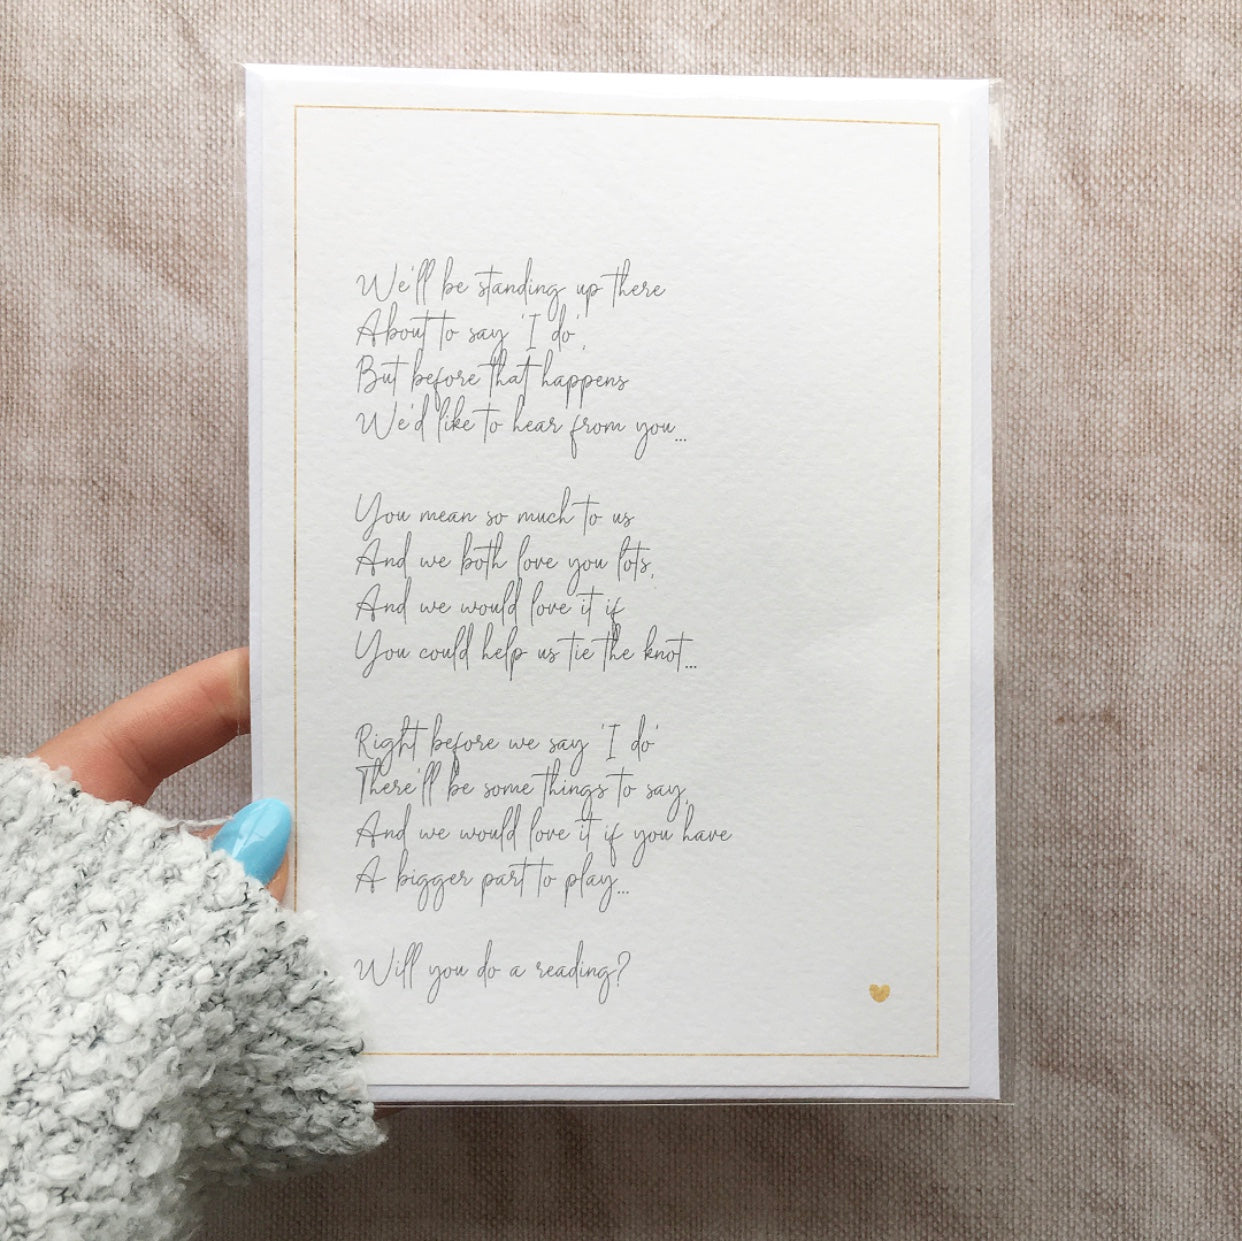 'Will you do a reading?' Seconds Poem Print